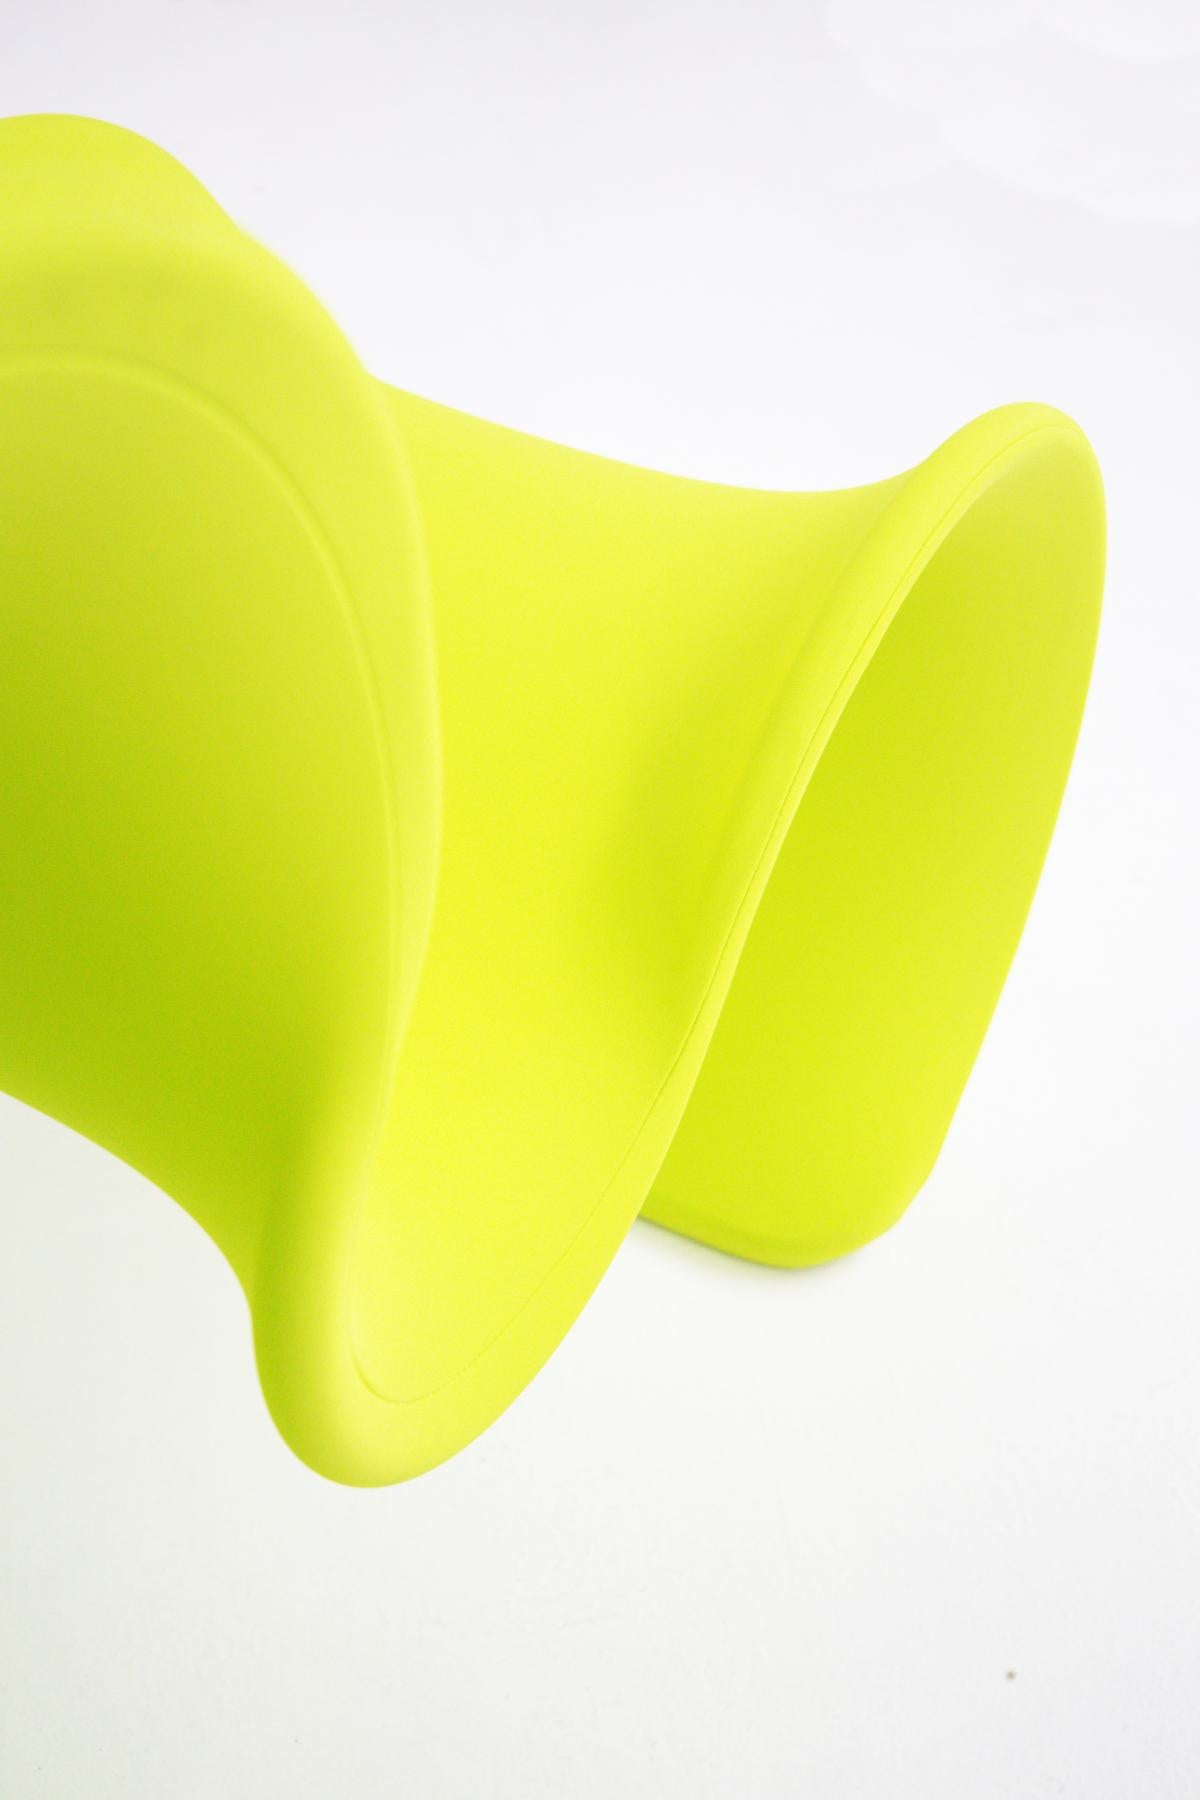 Gianni Pareschi Armchair Fiocco Acid Green for Busnelli In Good Condition For Sale In Milano, IT